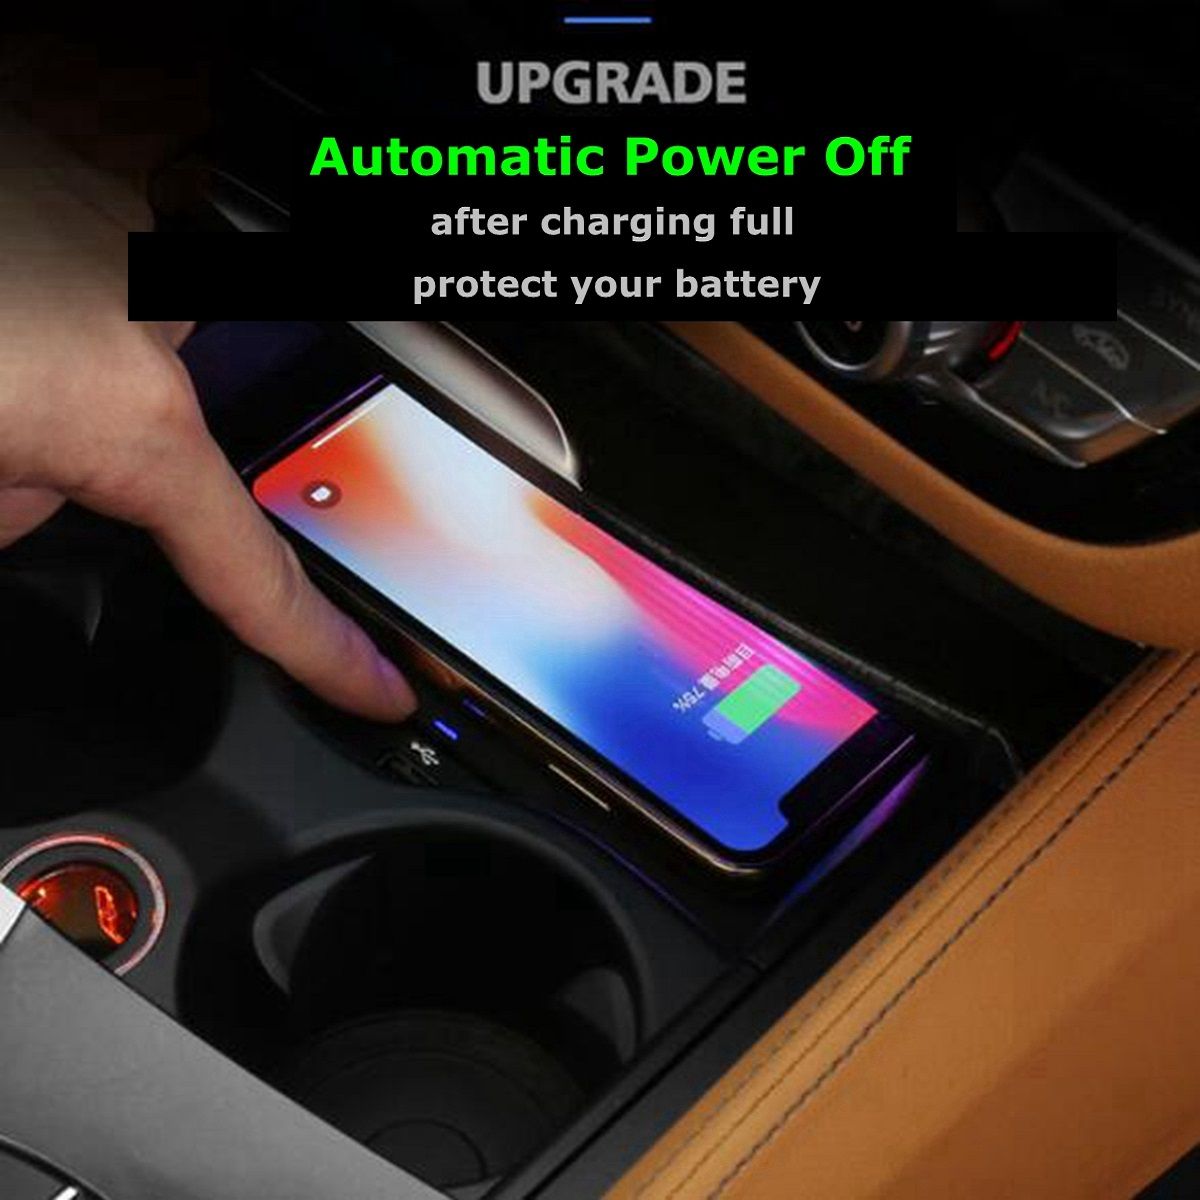 QI-Wireless-Charging-Phone-Charger-Center-Console-For-BMW-X4-F26-X3-F25-2011-2017-1423243